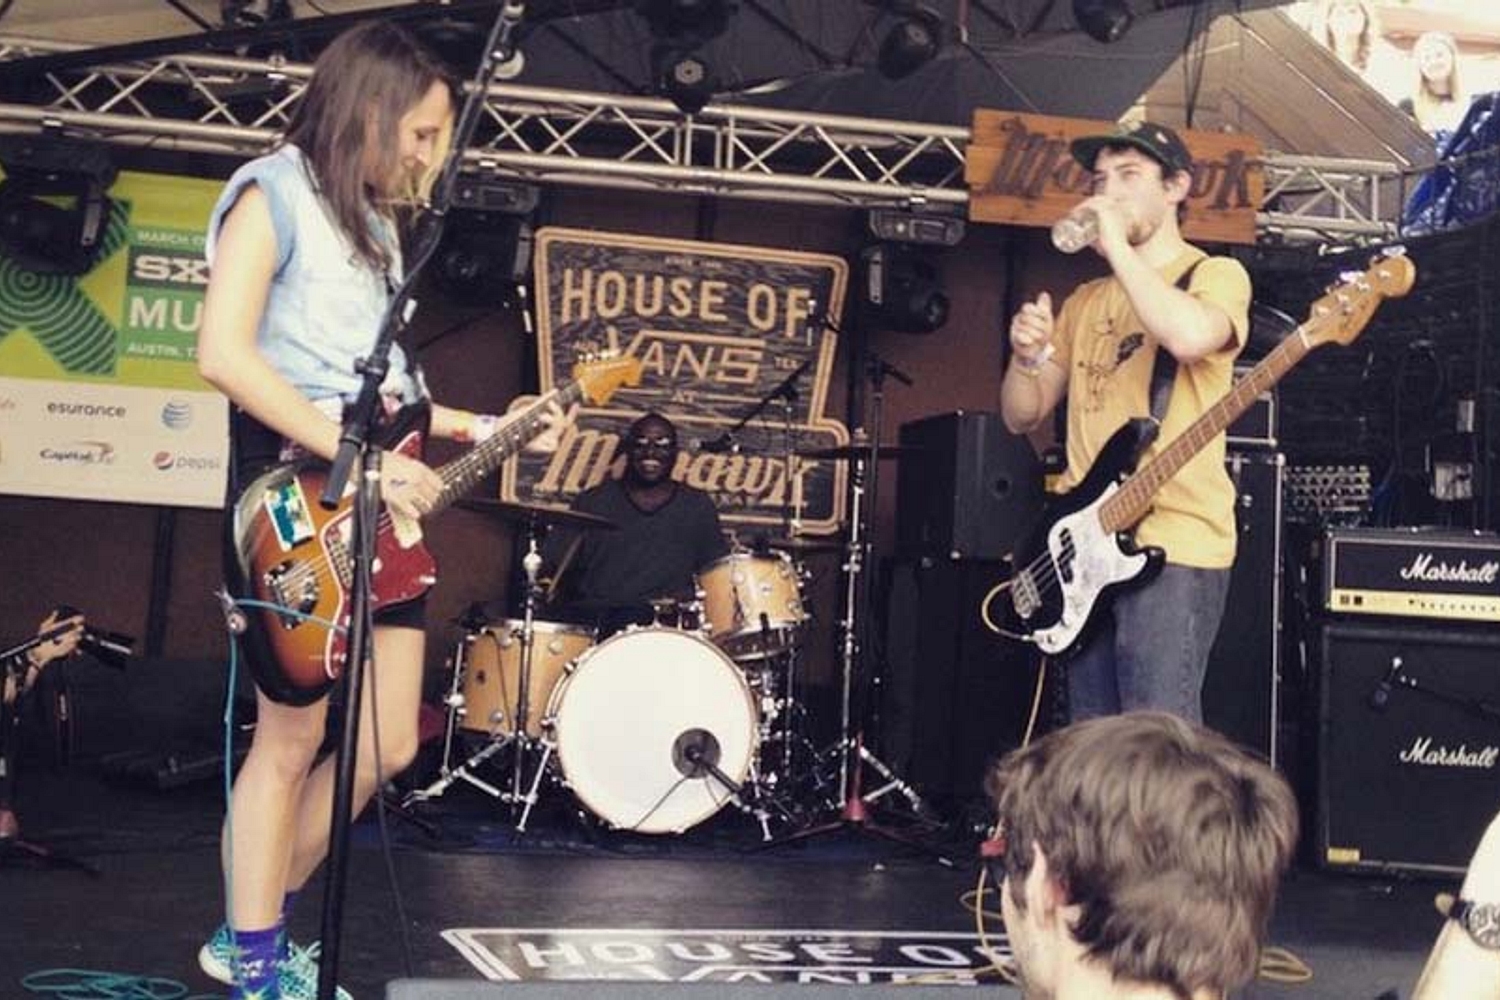 Broad City’s Hannibal Buress played drums for Speedy Ortiz at SXSW